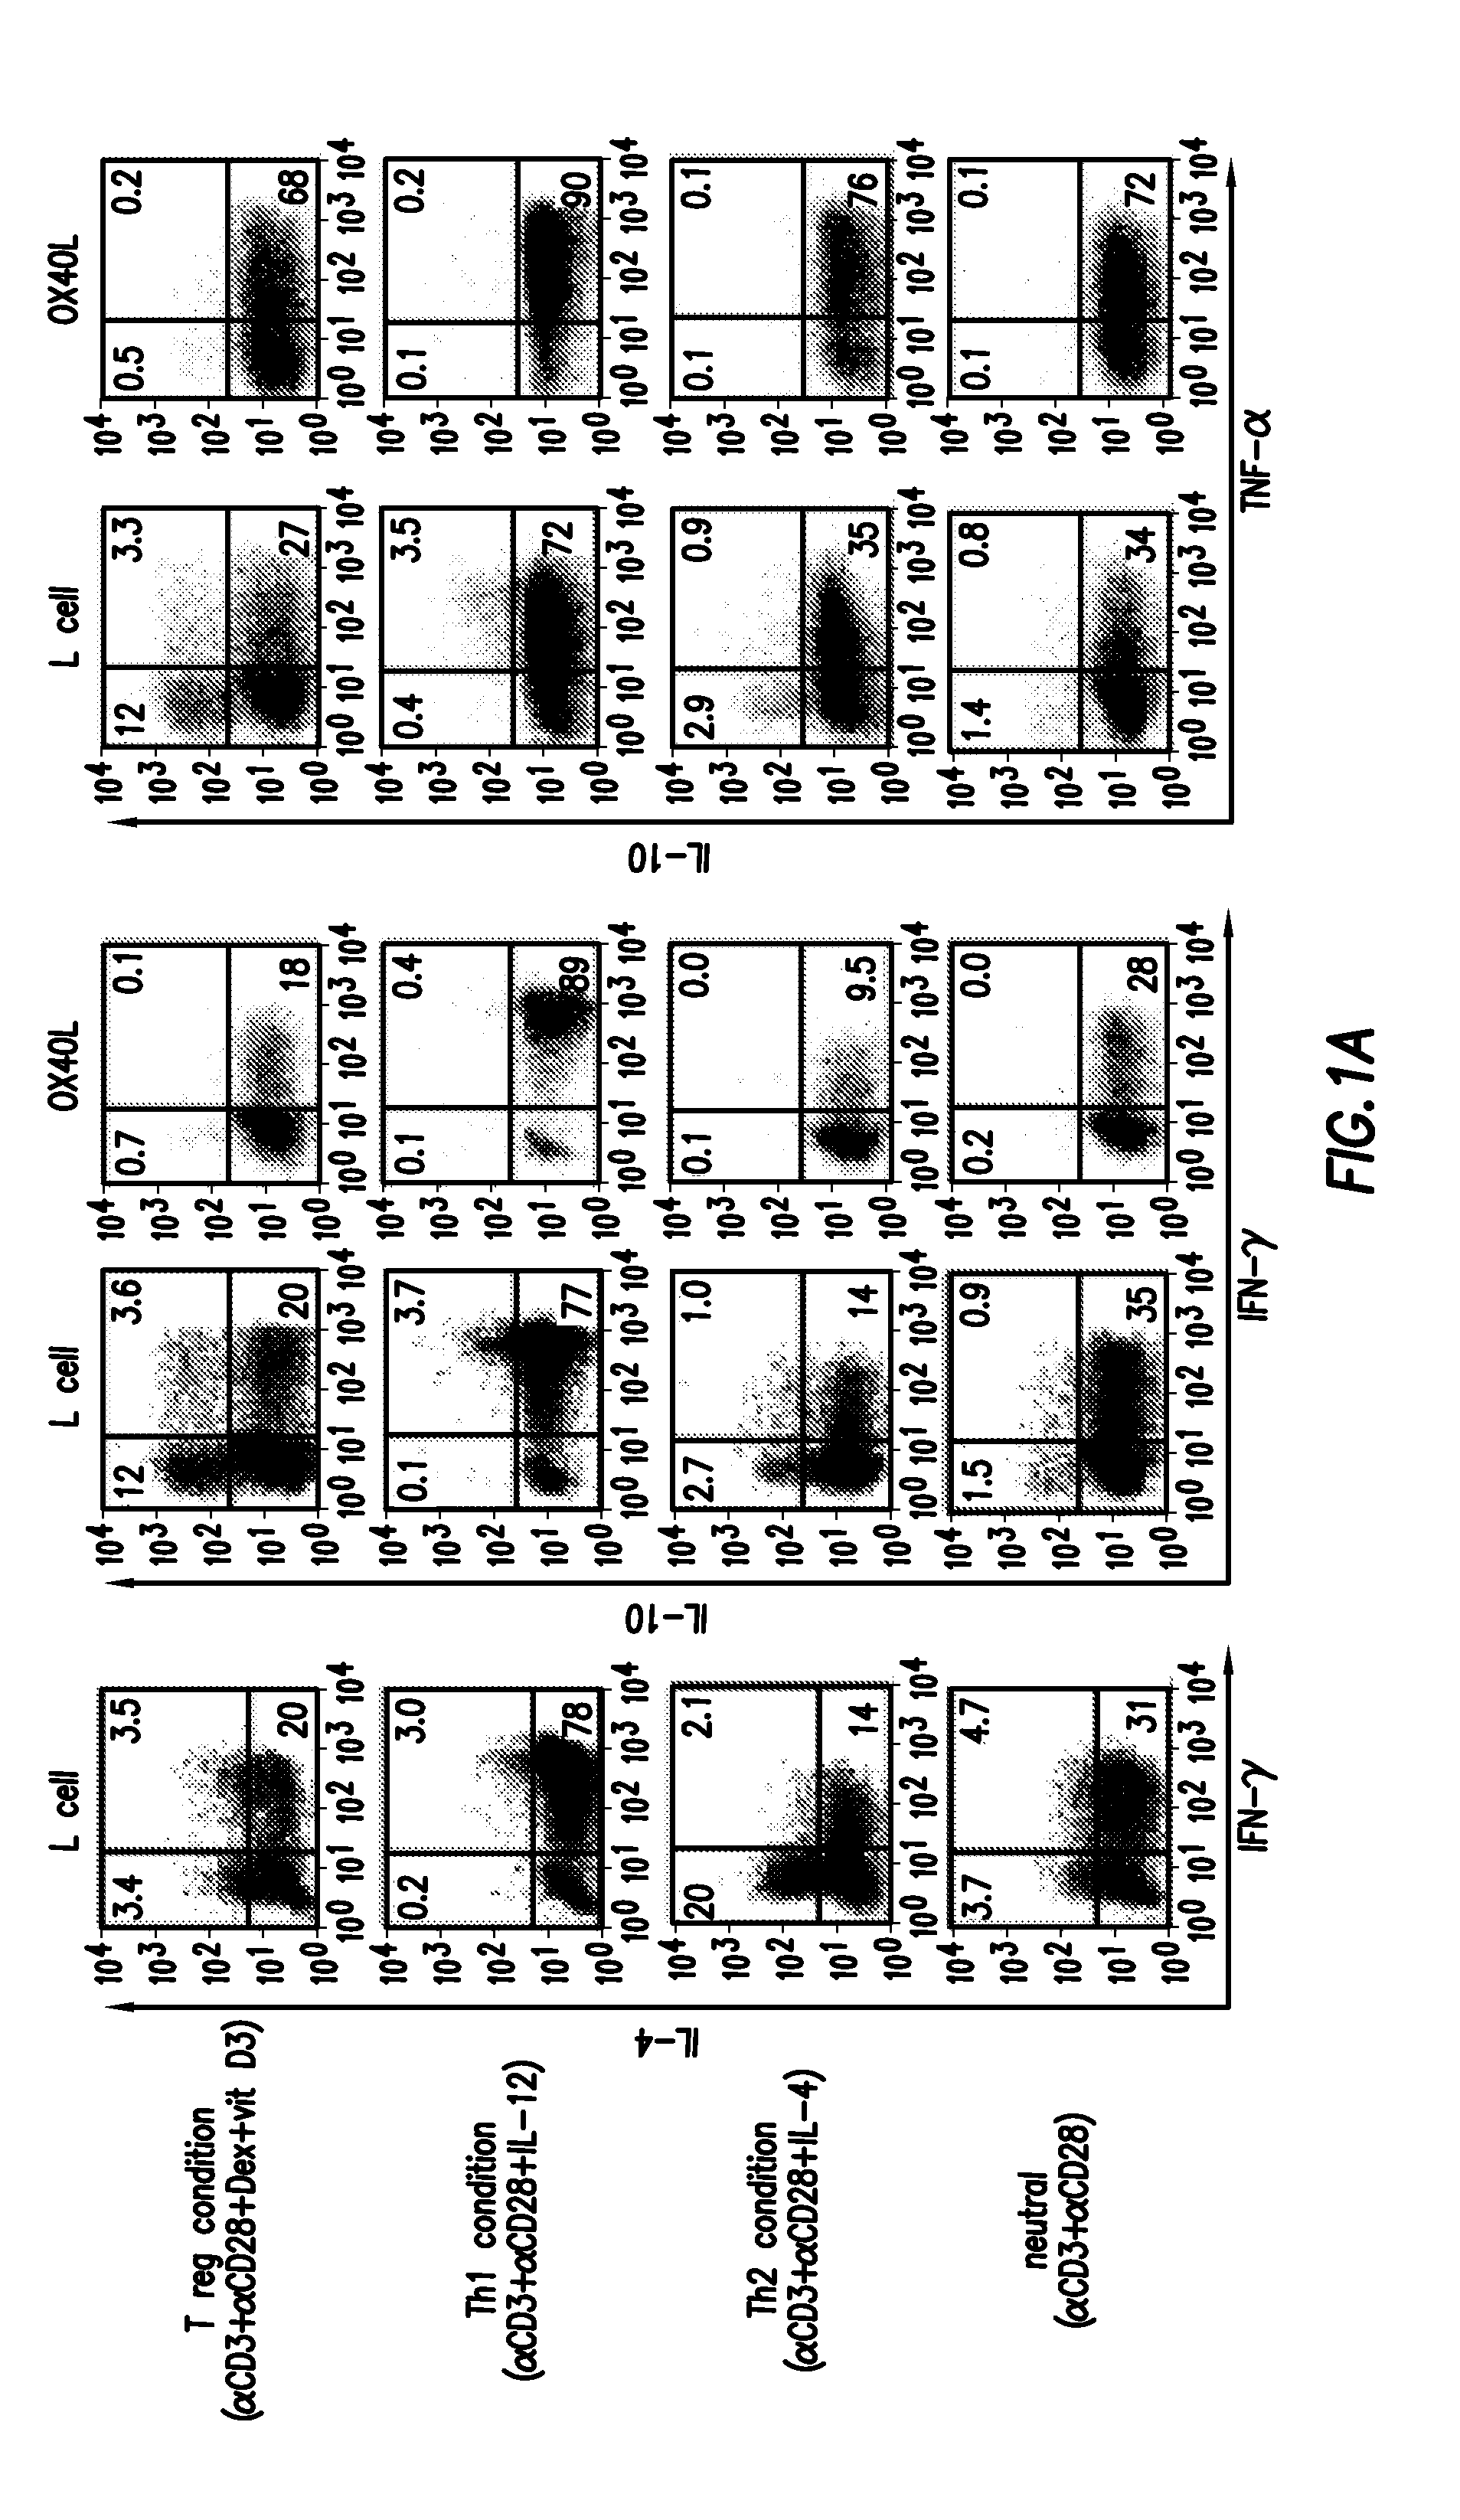 Methods of modulating the ox40 receptor to treat cancer